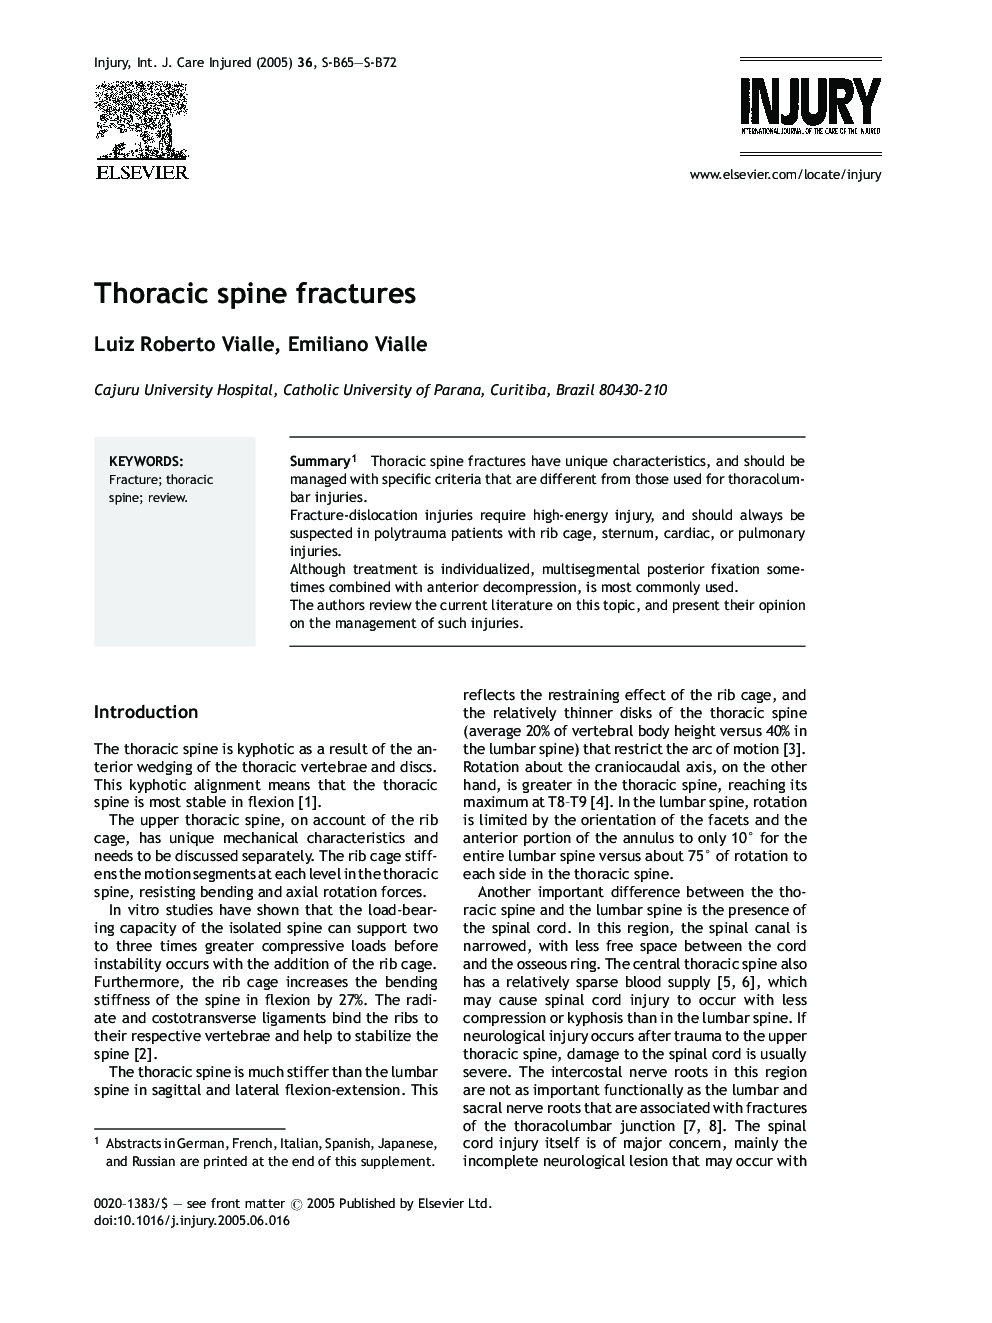 Thoracic spine fractures